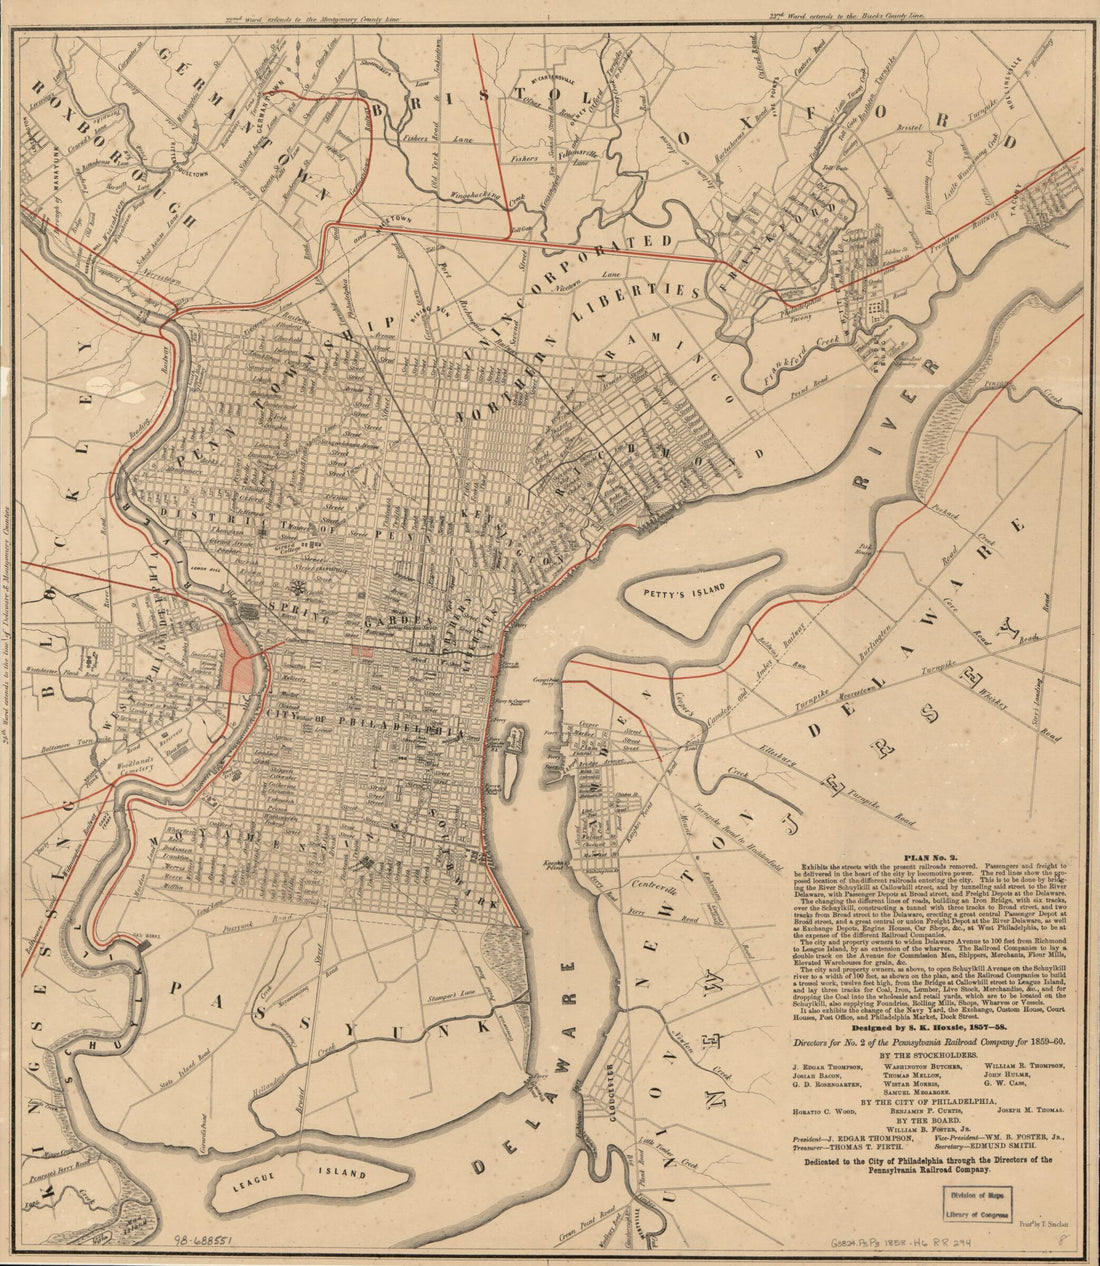 This old map of 58 from 1858 was created by S. K. Hoxsie in 1858